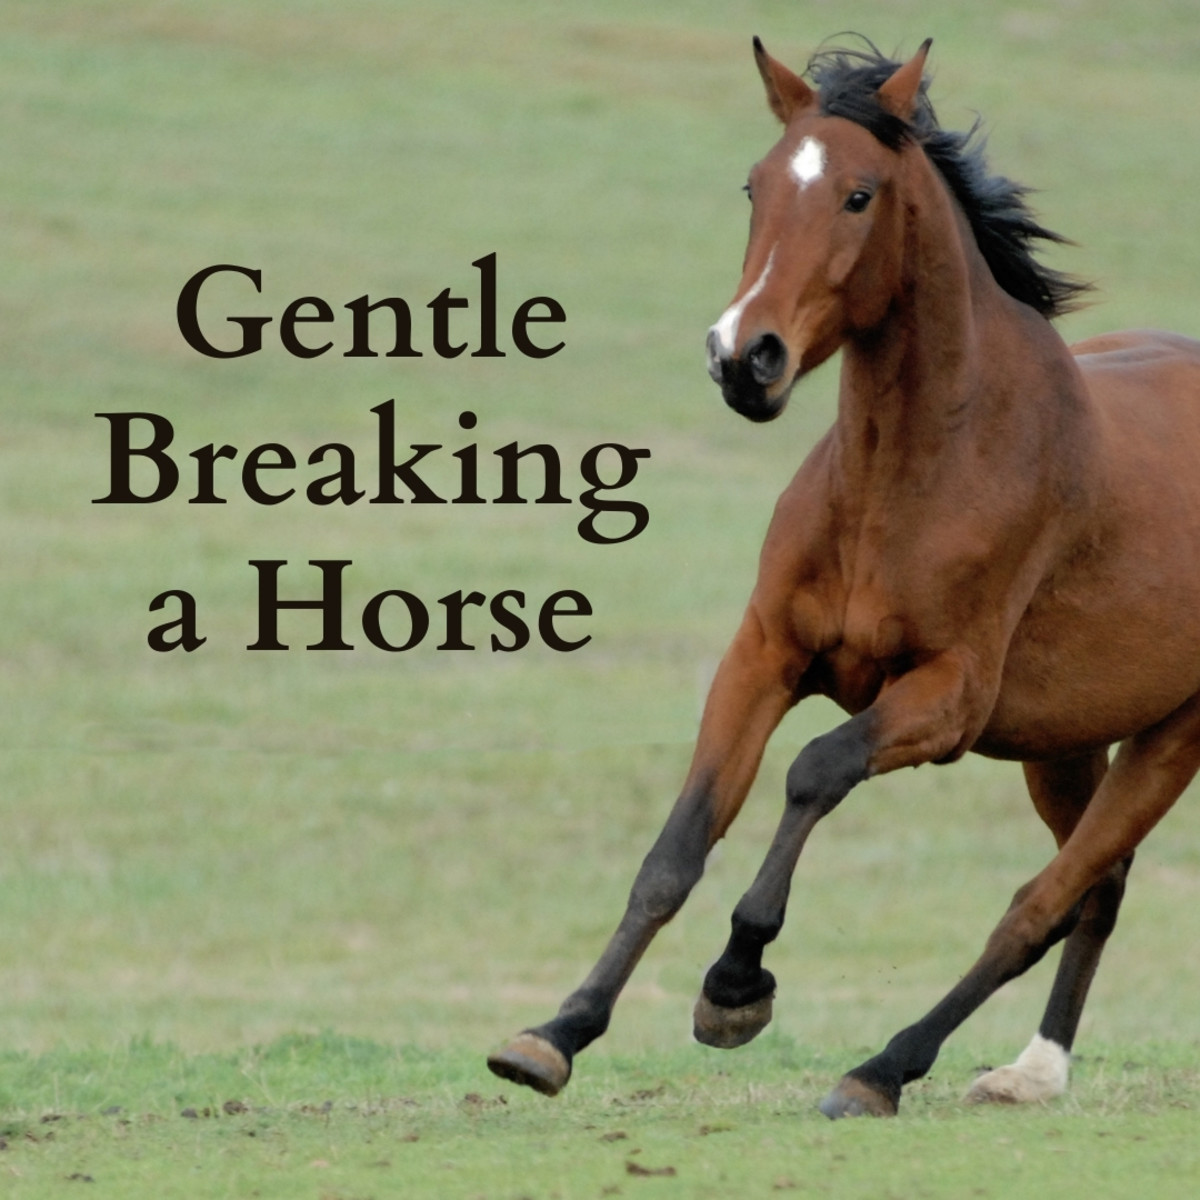 Gentle training a horse can give you a lifelong companion.